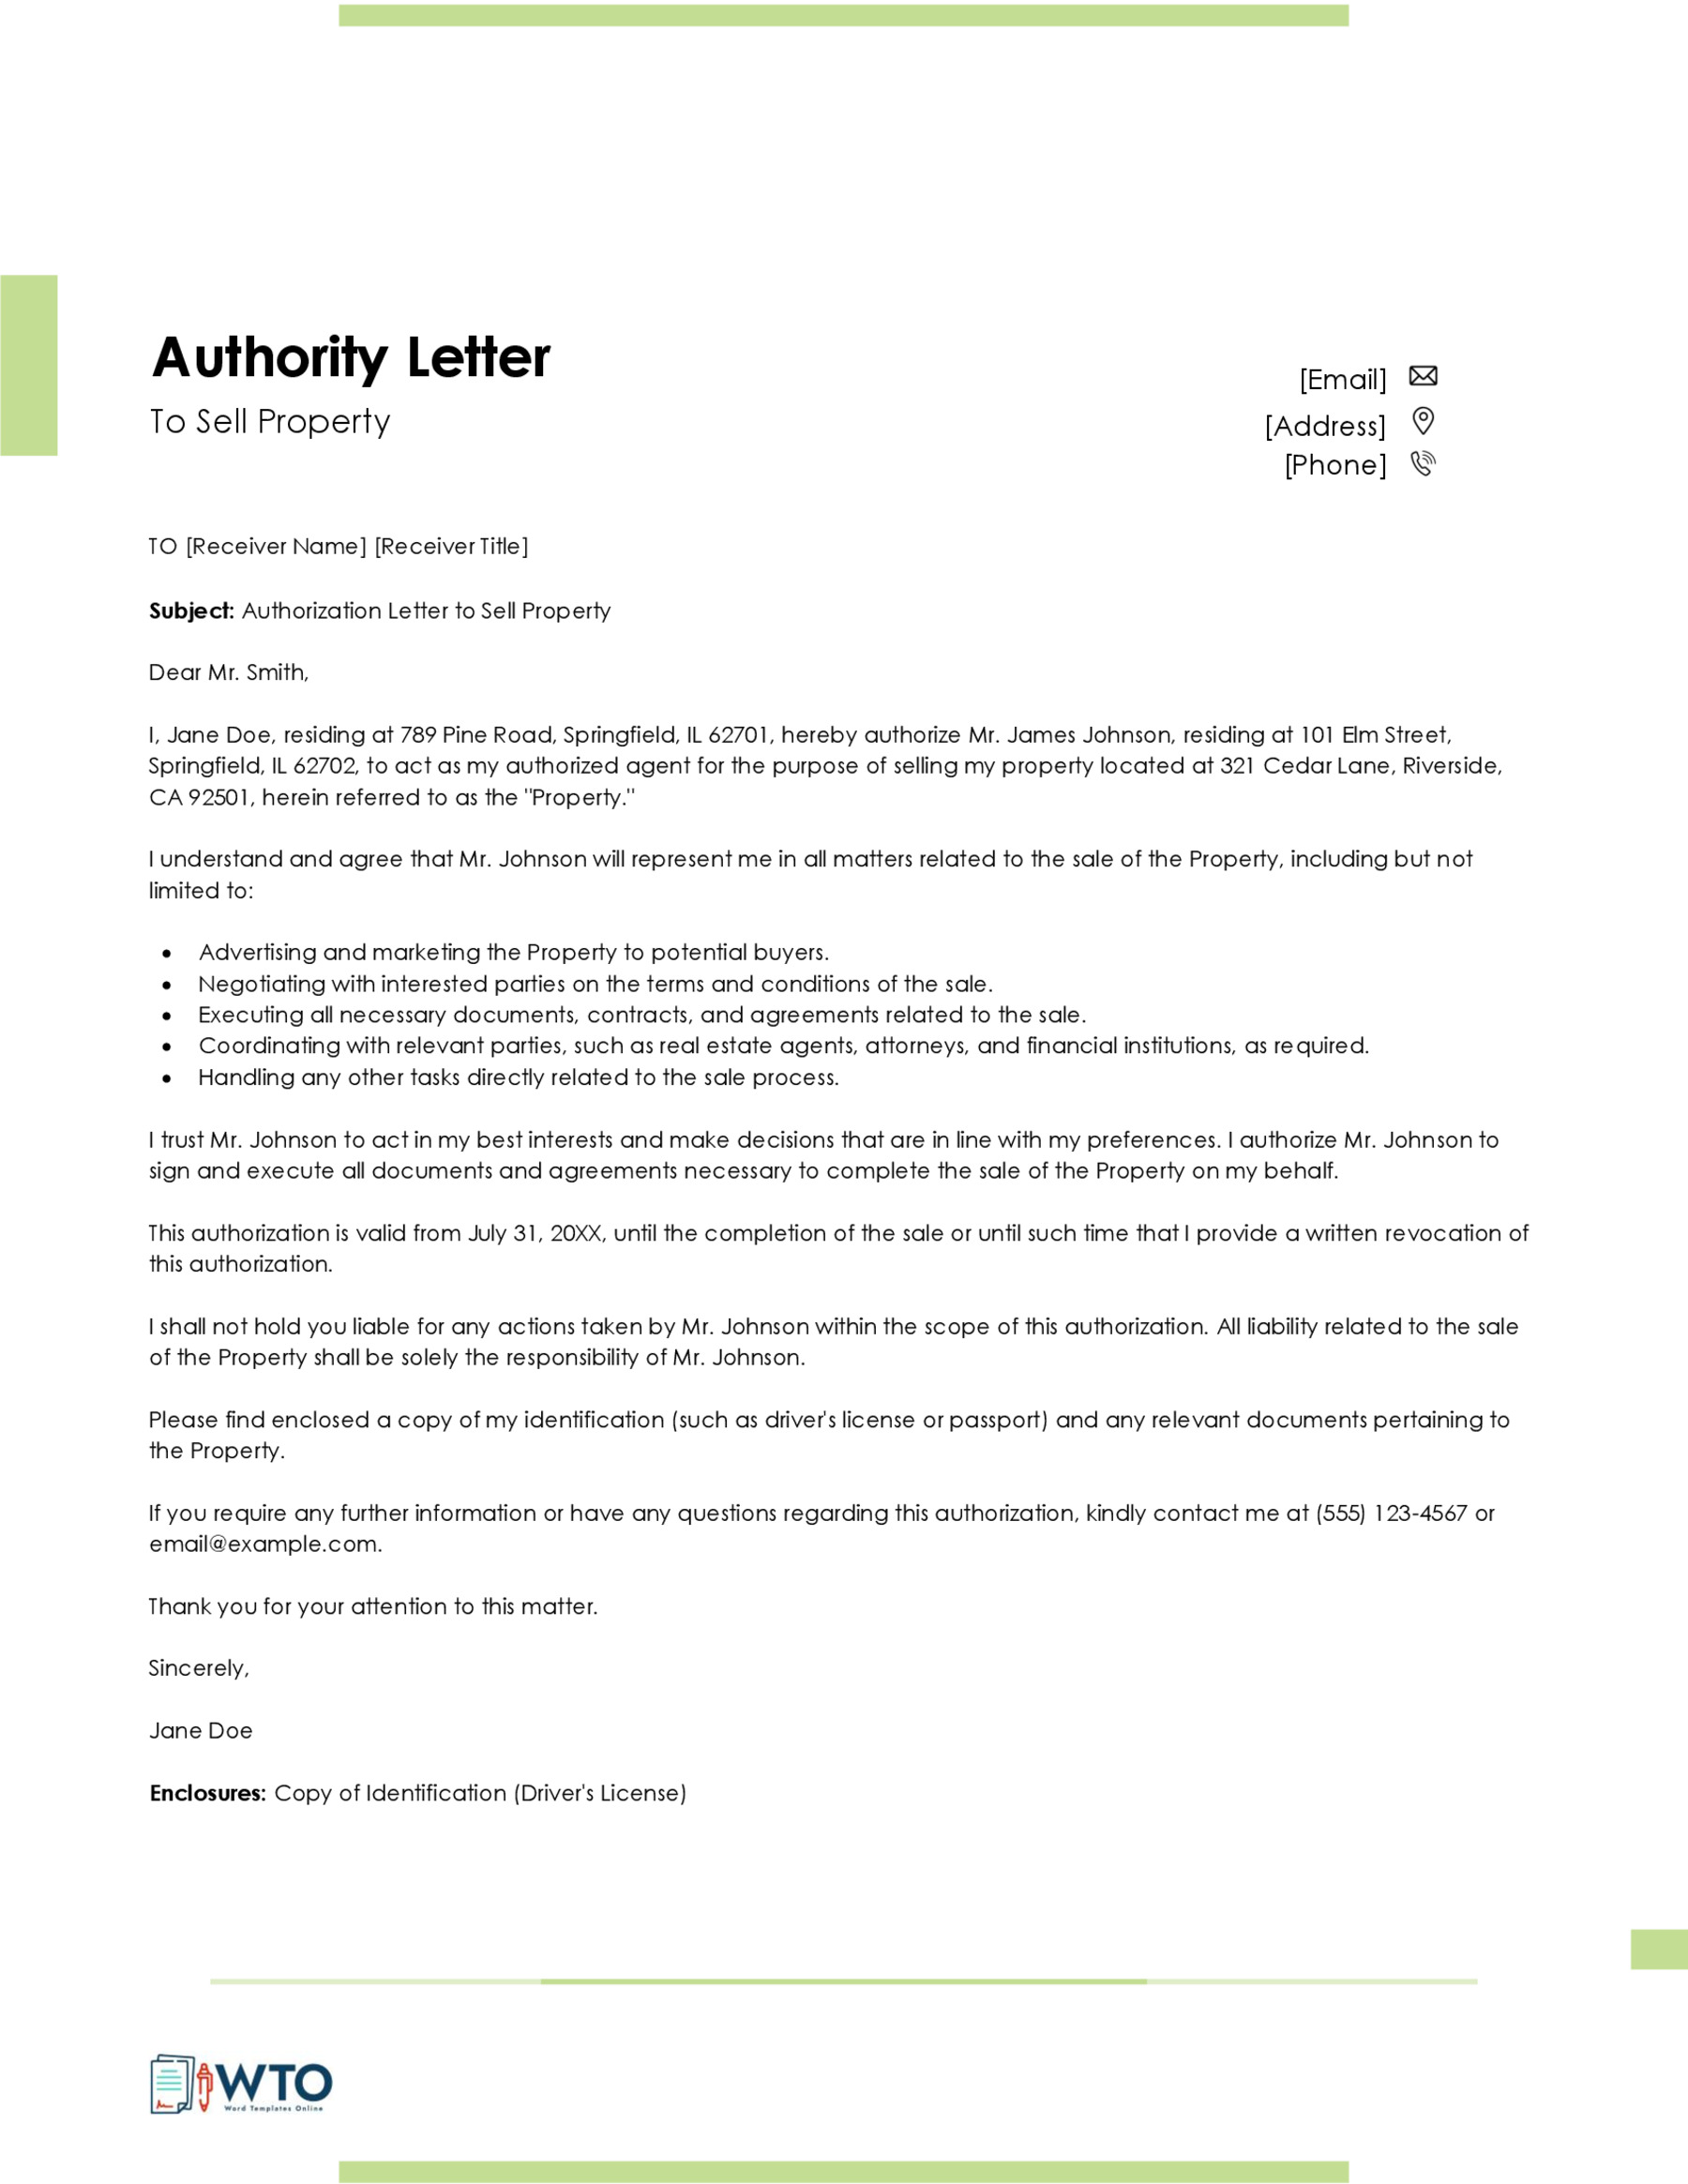 Authorization Letter to Sell Property-Free in ms word